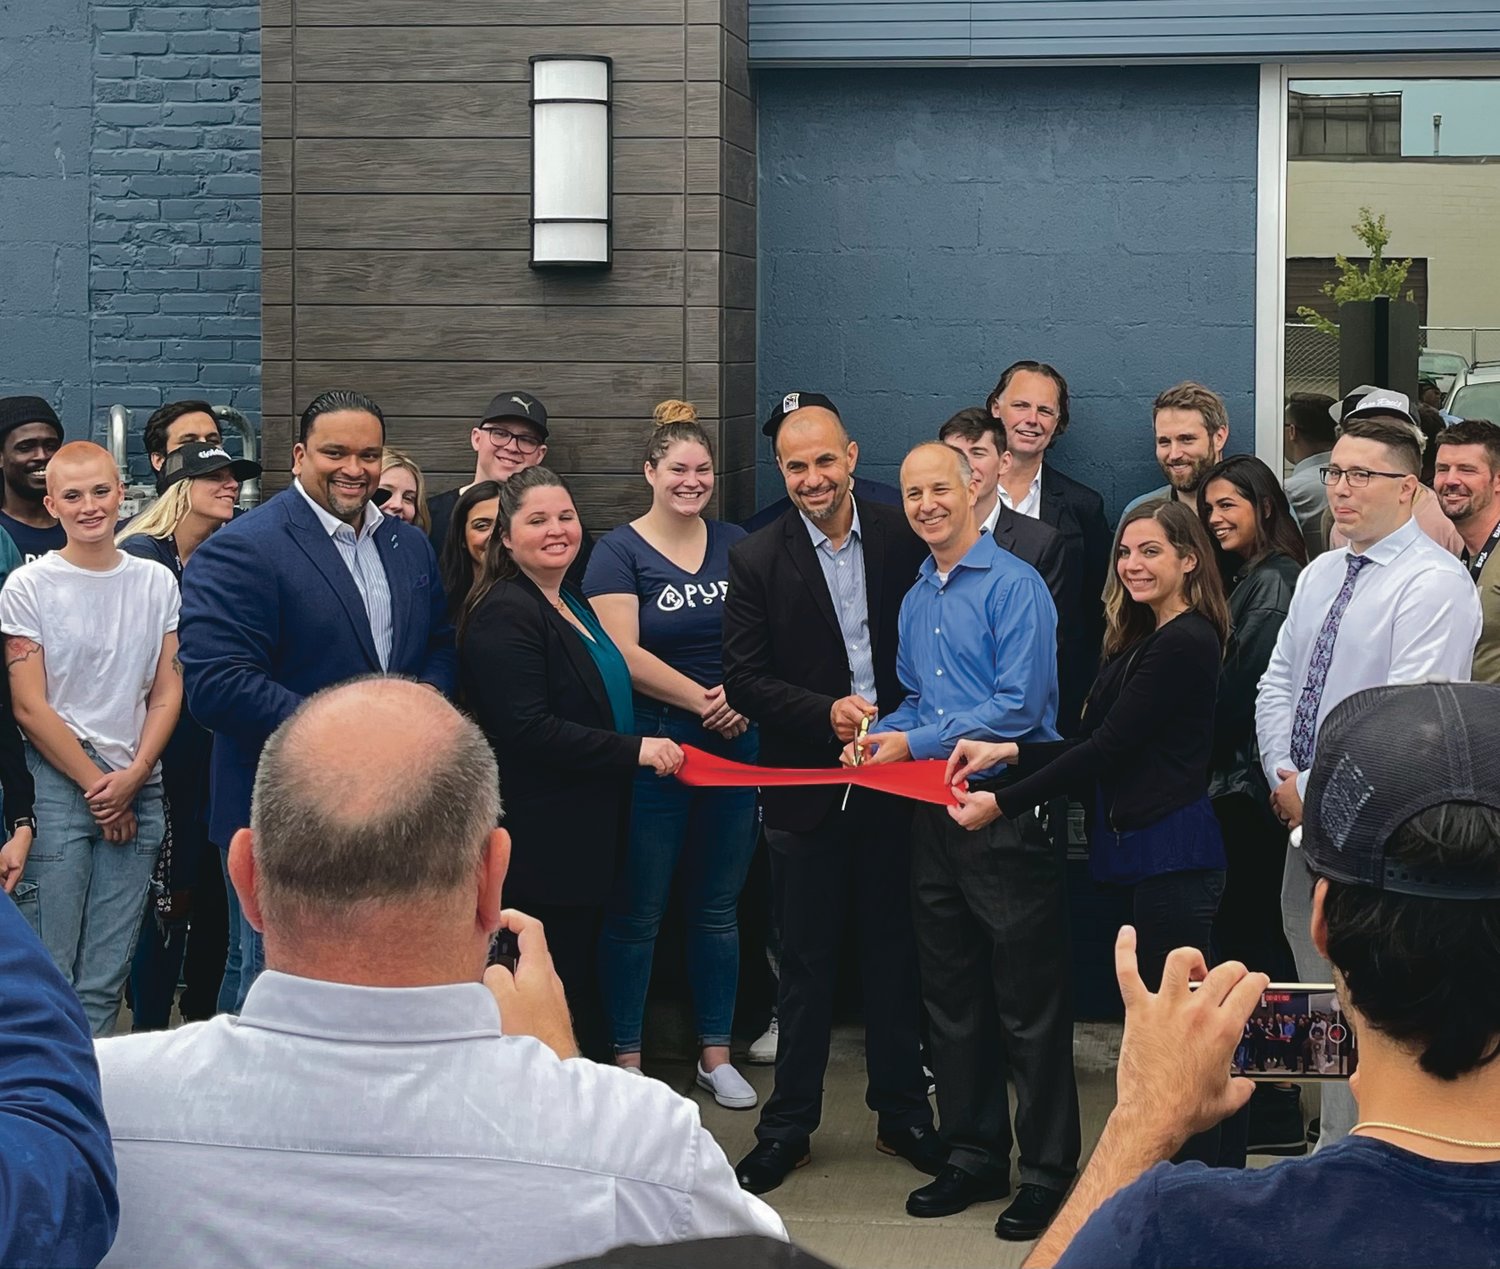 Lansing Mayor Andy Schor cuts the ribbon Tuesday (Sept. 20) at Pure Roots’ grand opening event at its new location Tuesday (Sept. 20) at 515 N. Larch St.